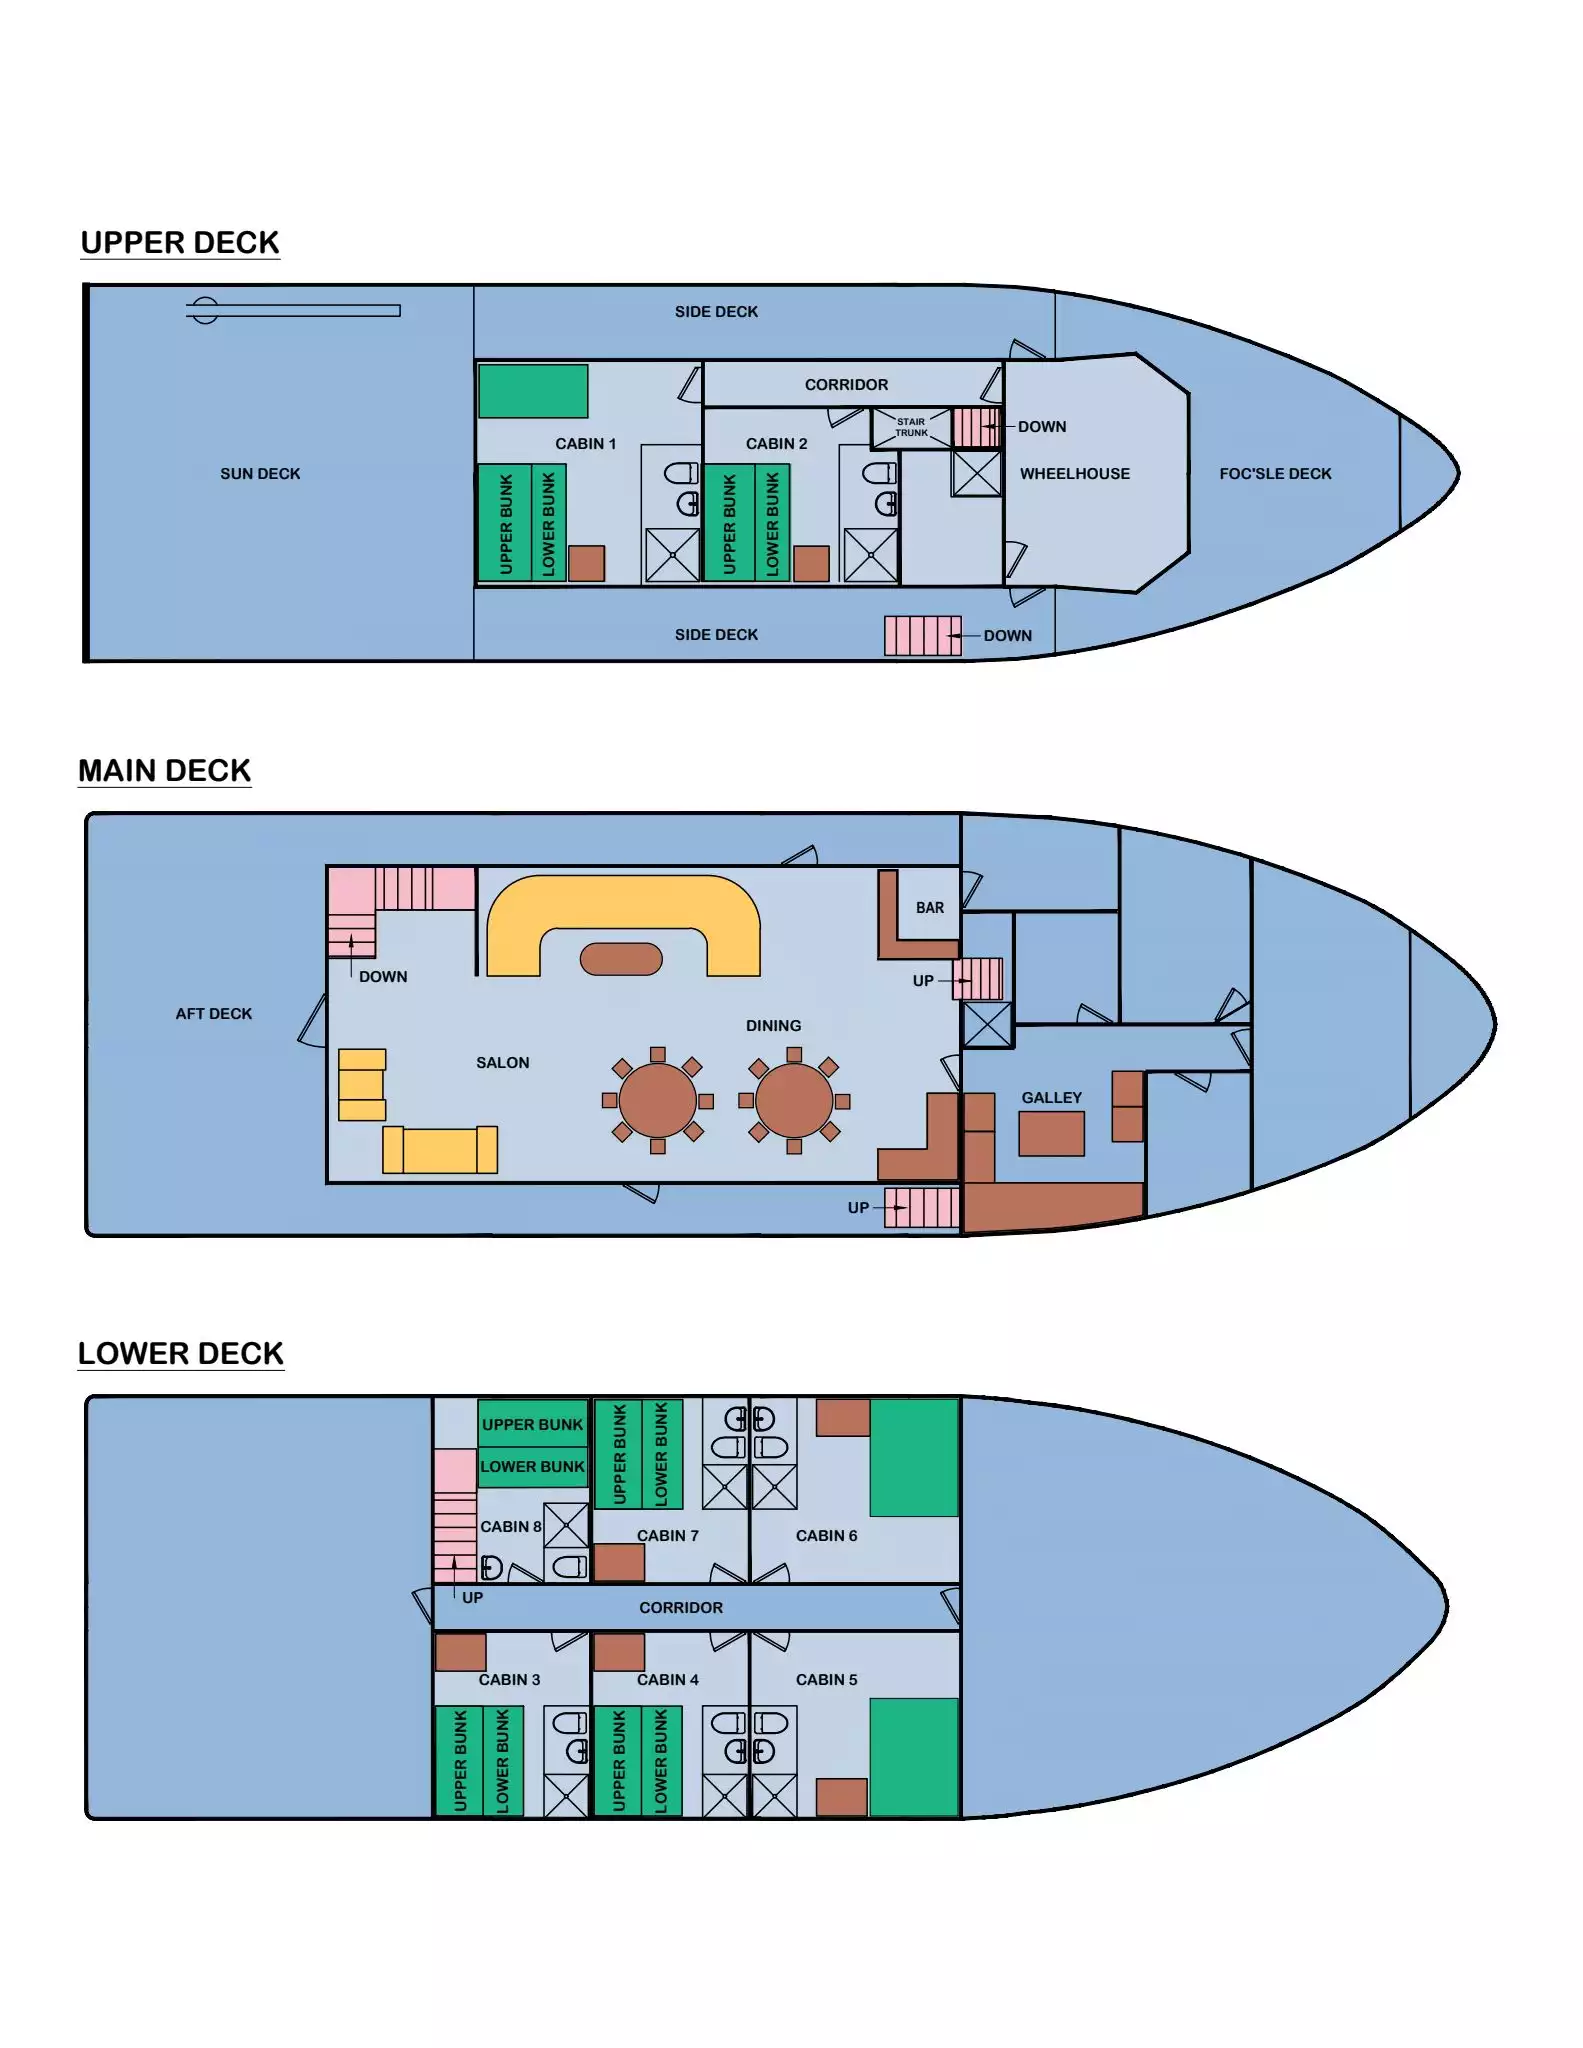 Deck plan of Cachalote Explorer Galapagos ship with 3 decks, 8 cabins, lounge & dining room.